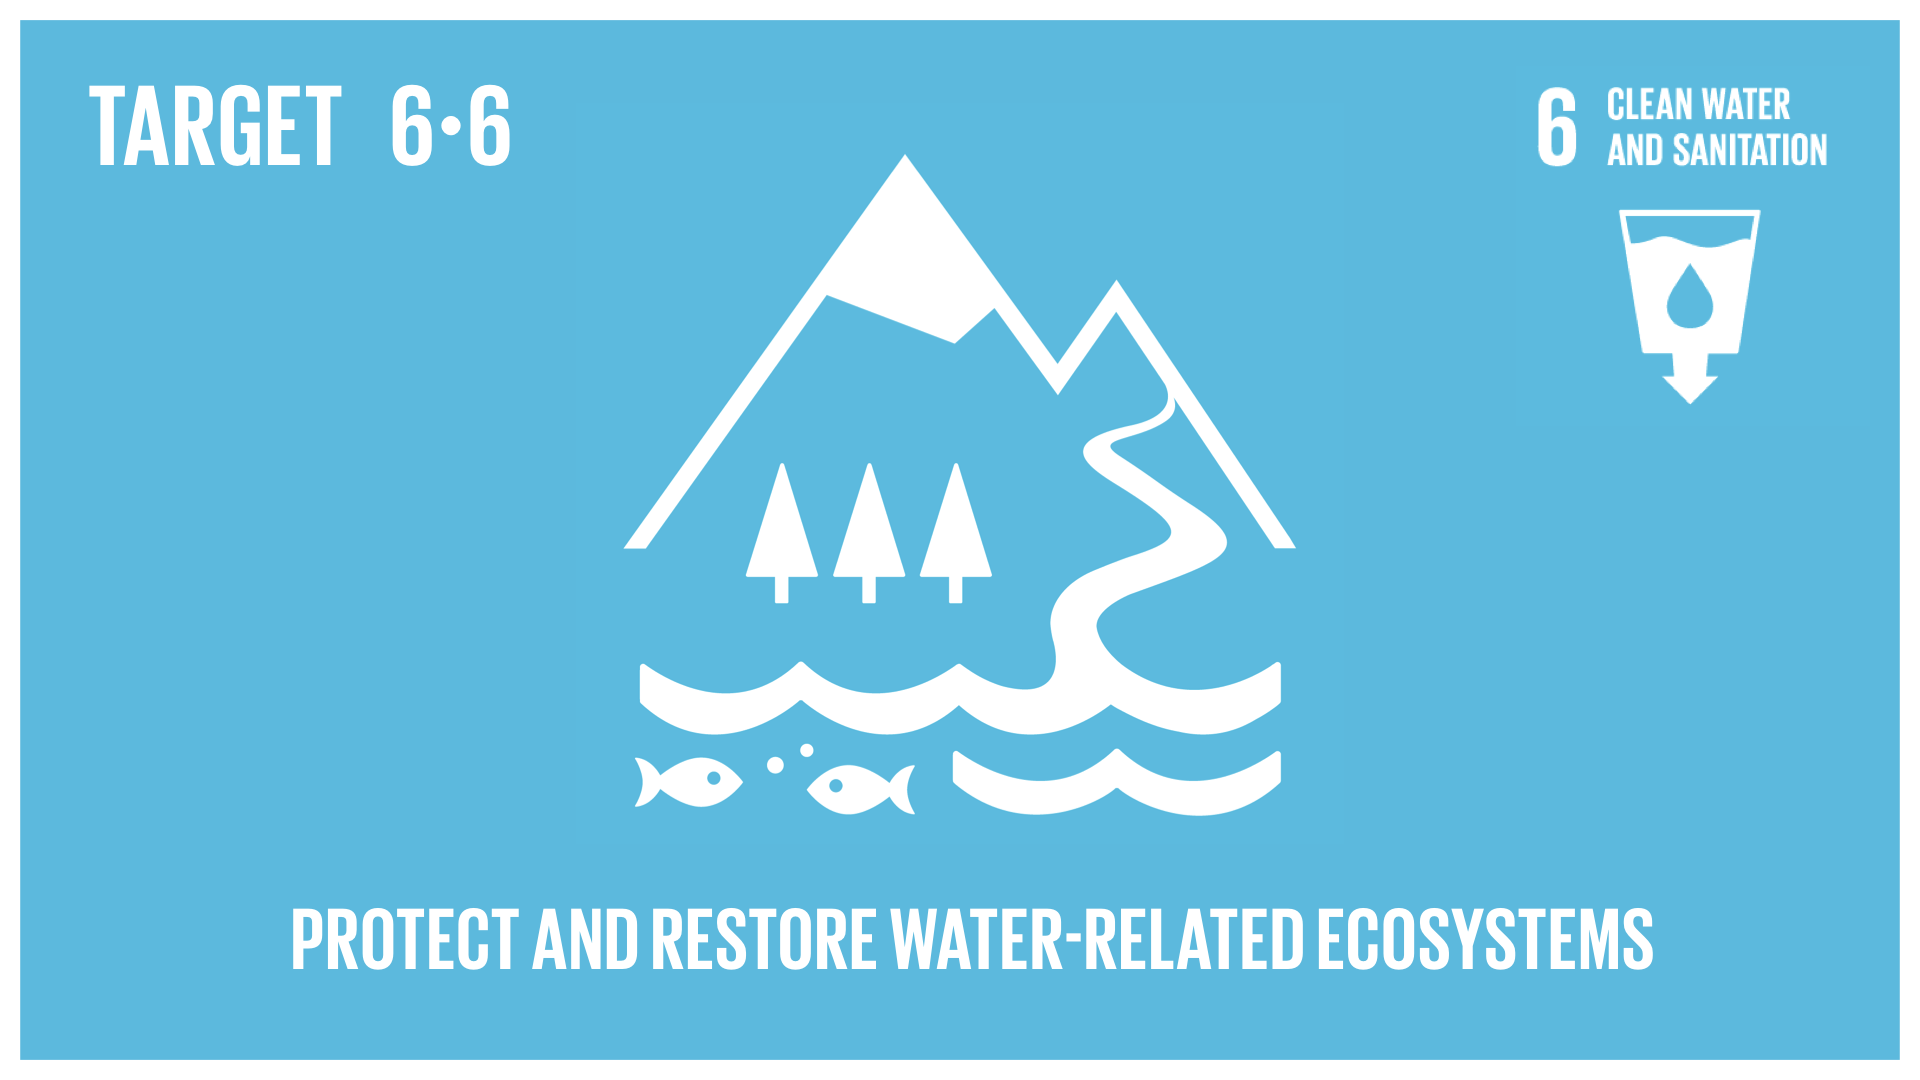 Graphic displaying the protection and restoration of water-related ecosystems